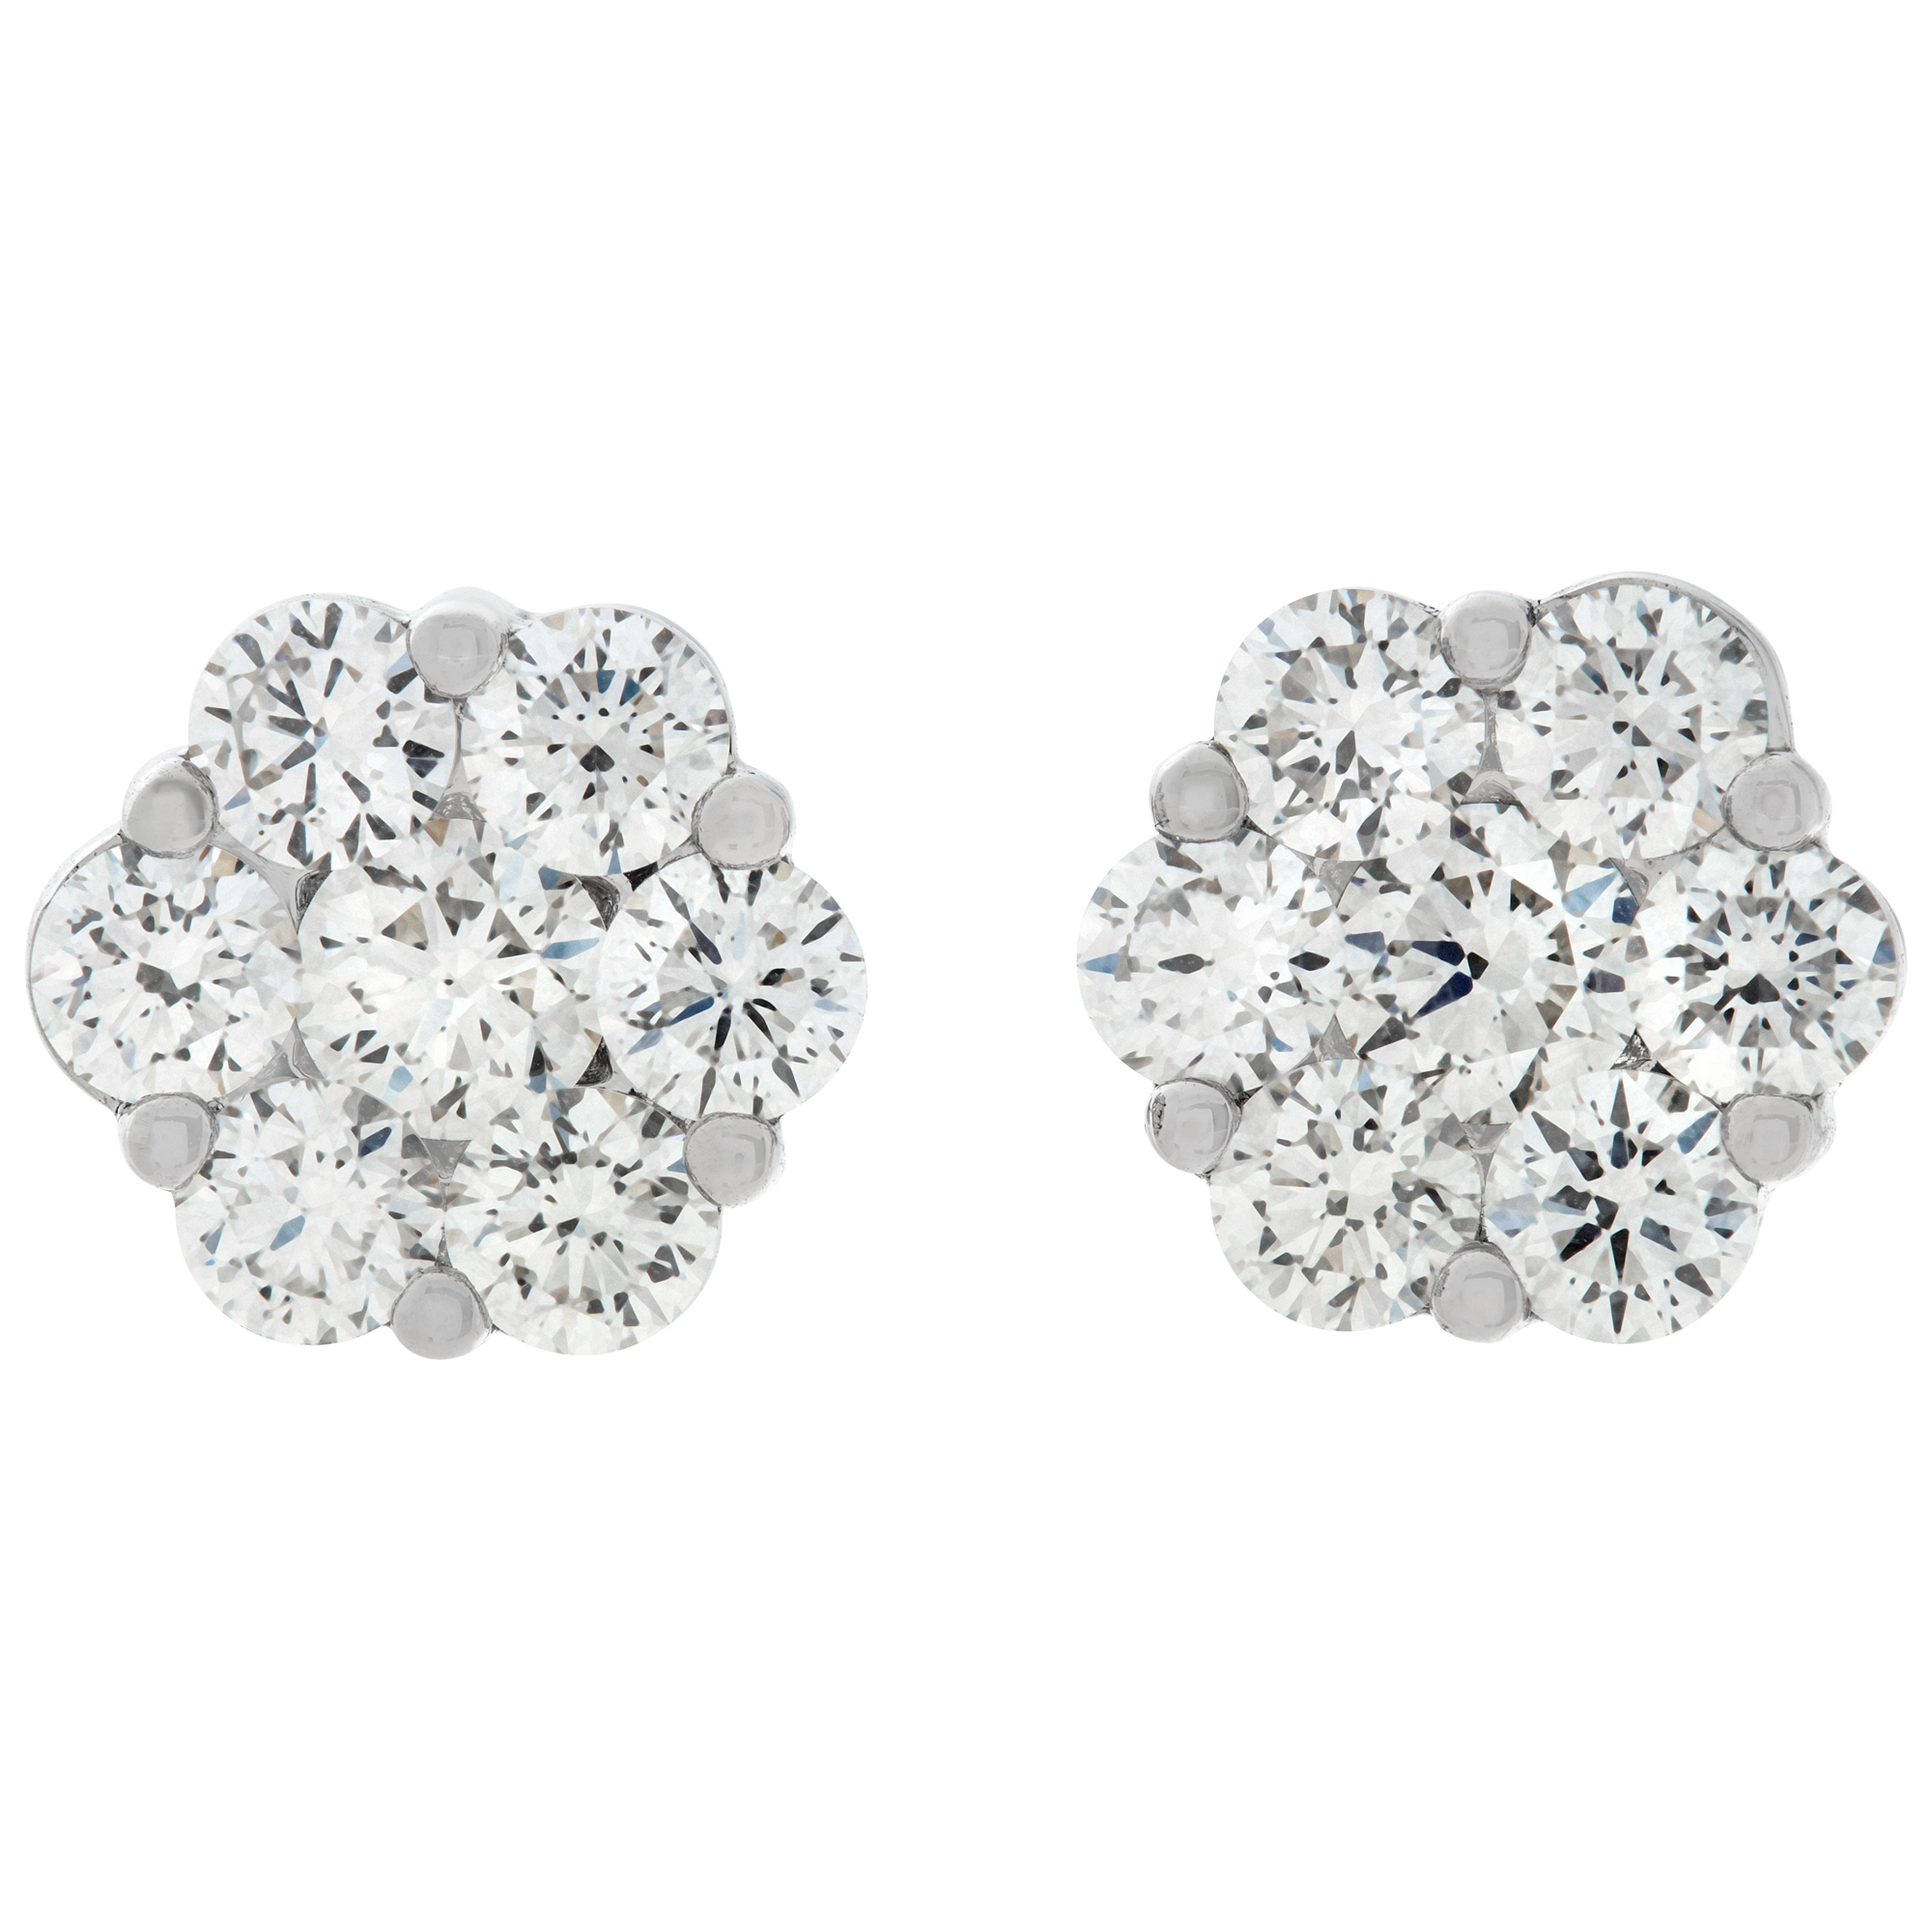 Floral shaped round diamond cluster earrings in 18k white gold with 2.49 carats image 1